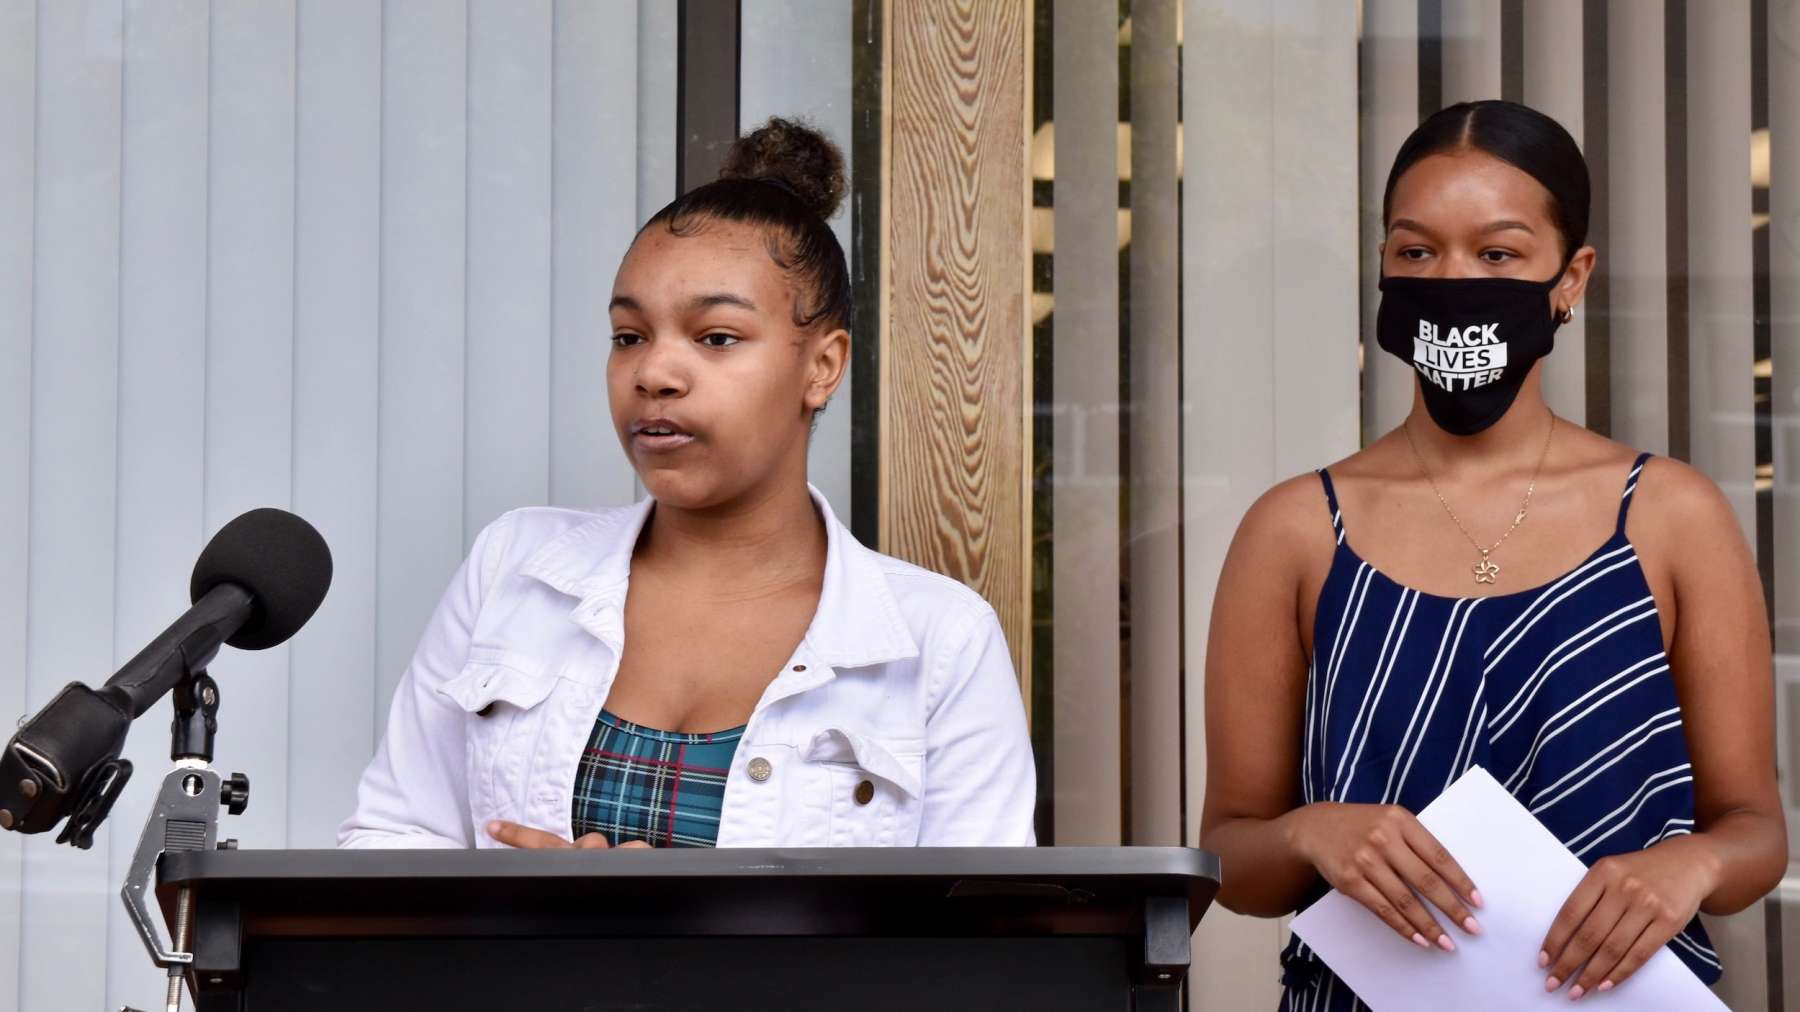 Youth led group Gen Z: We Want to Live plans protest for Sunday in Providence